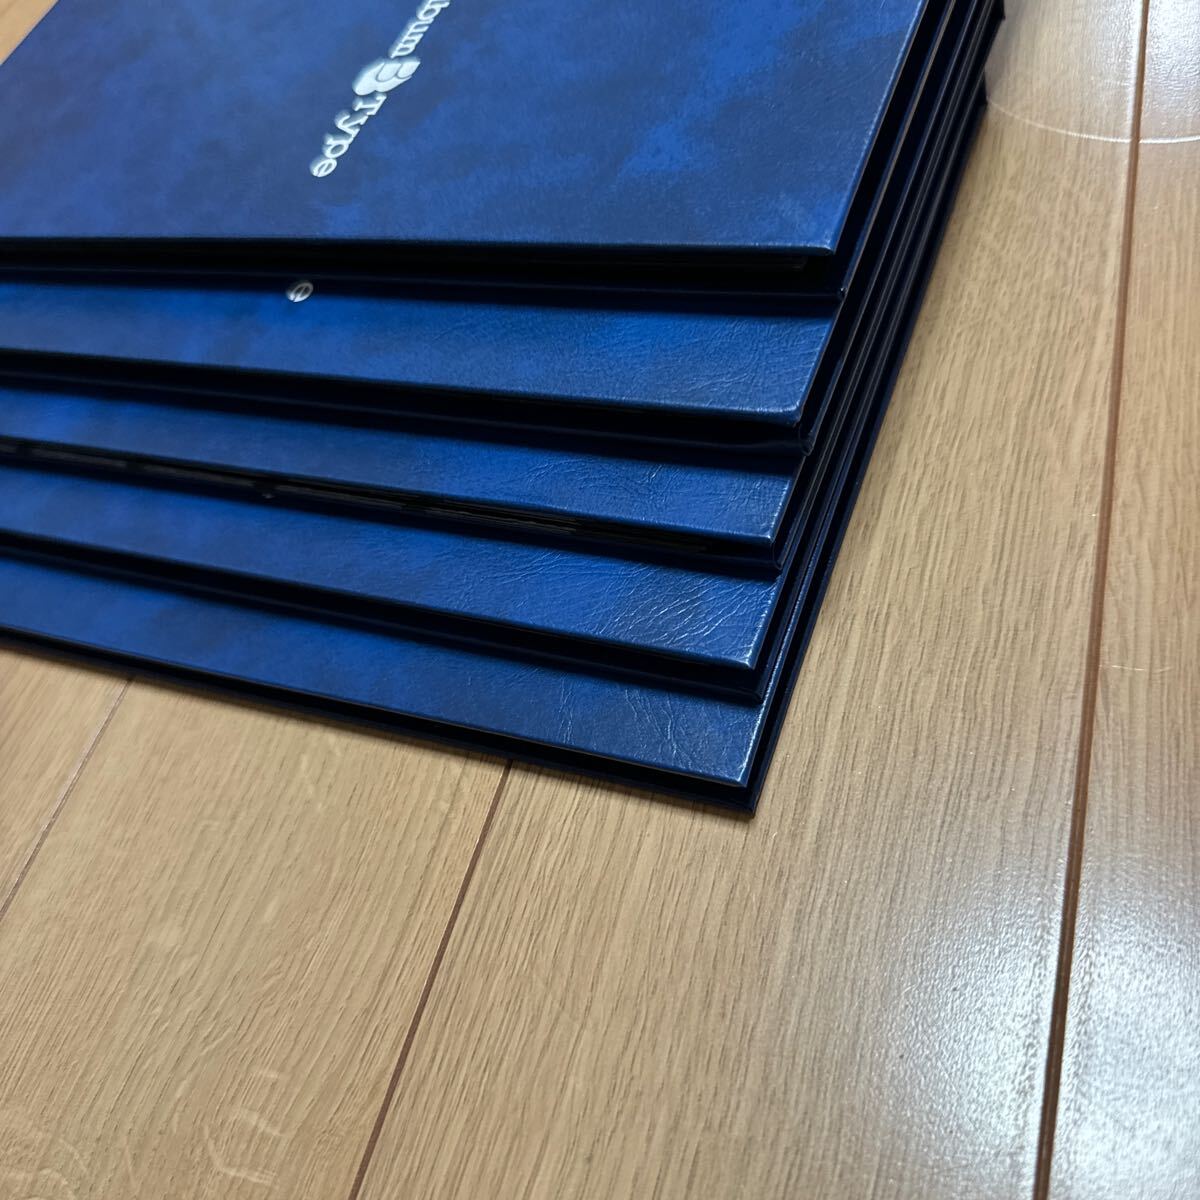  stock book te-ji-SB-30 stamp album 5 pcs. summarize case attaching length some 26.8cm width some 20cm cardboard 8 sheets 16 page 6 step Yupack 60 size 